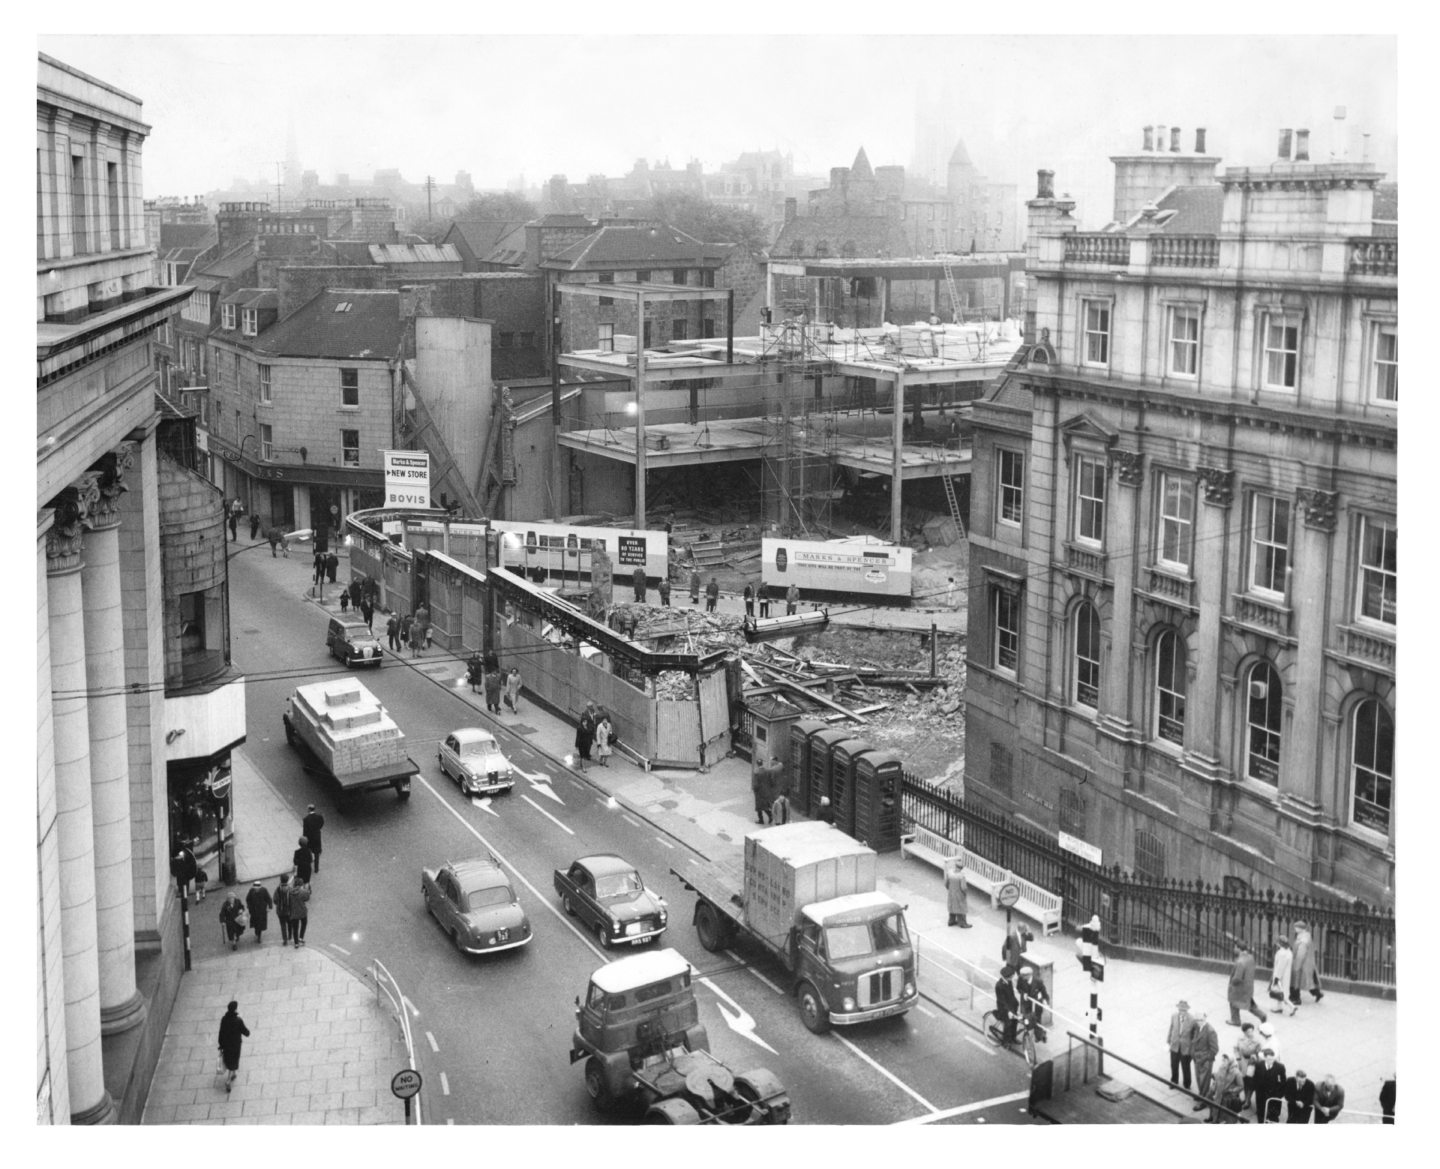 The development of the M&S branch at St Nicholas Street in the 60s